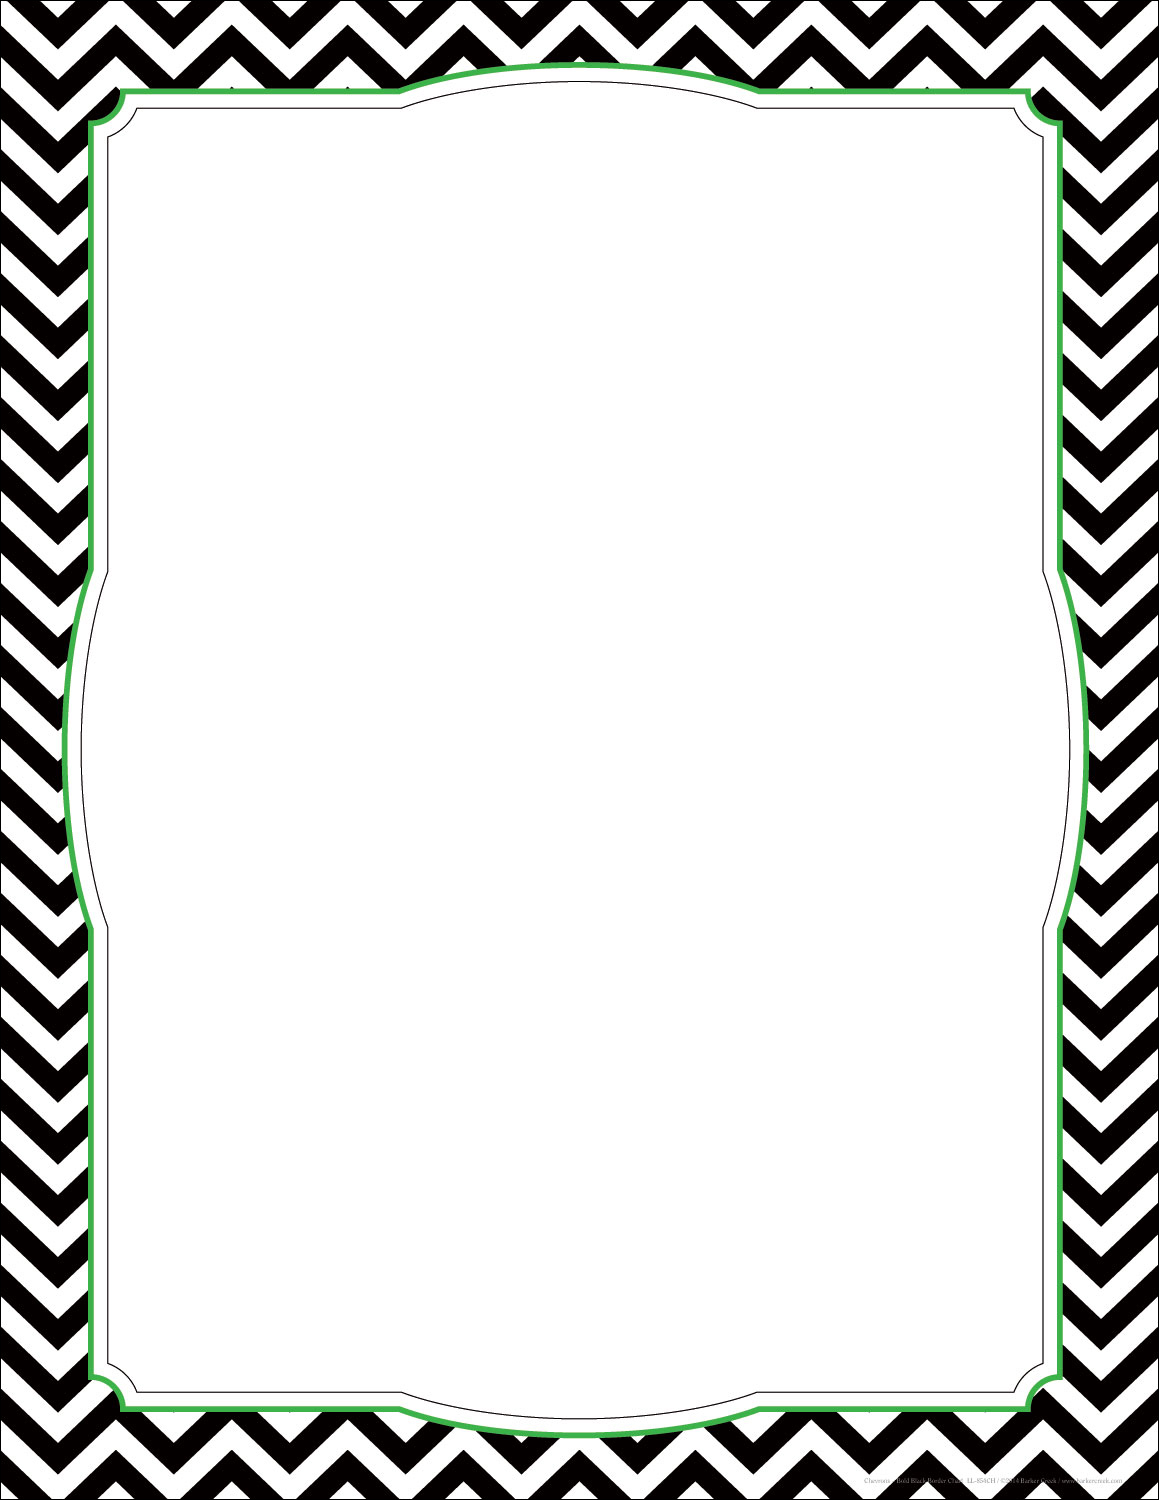 free-paper-border-clipart-best